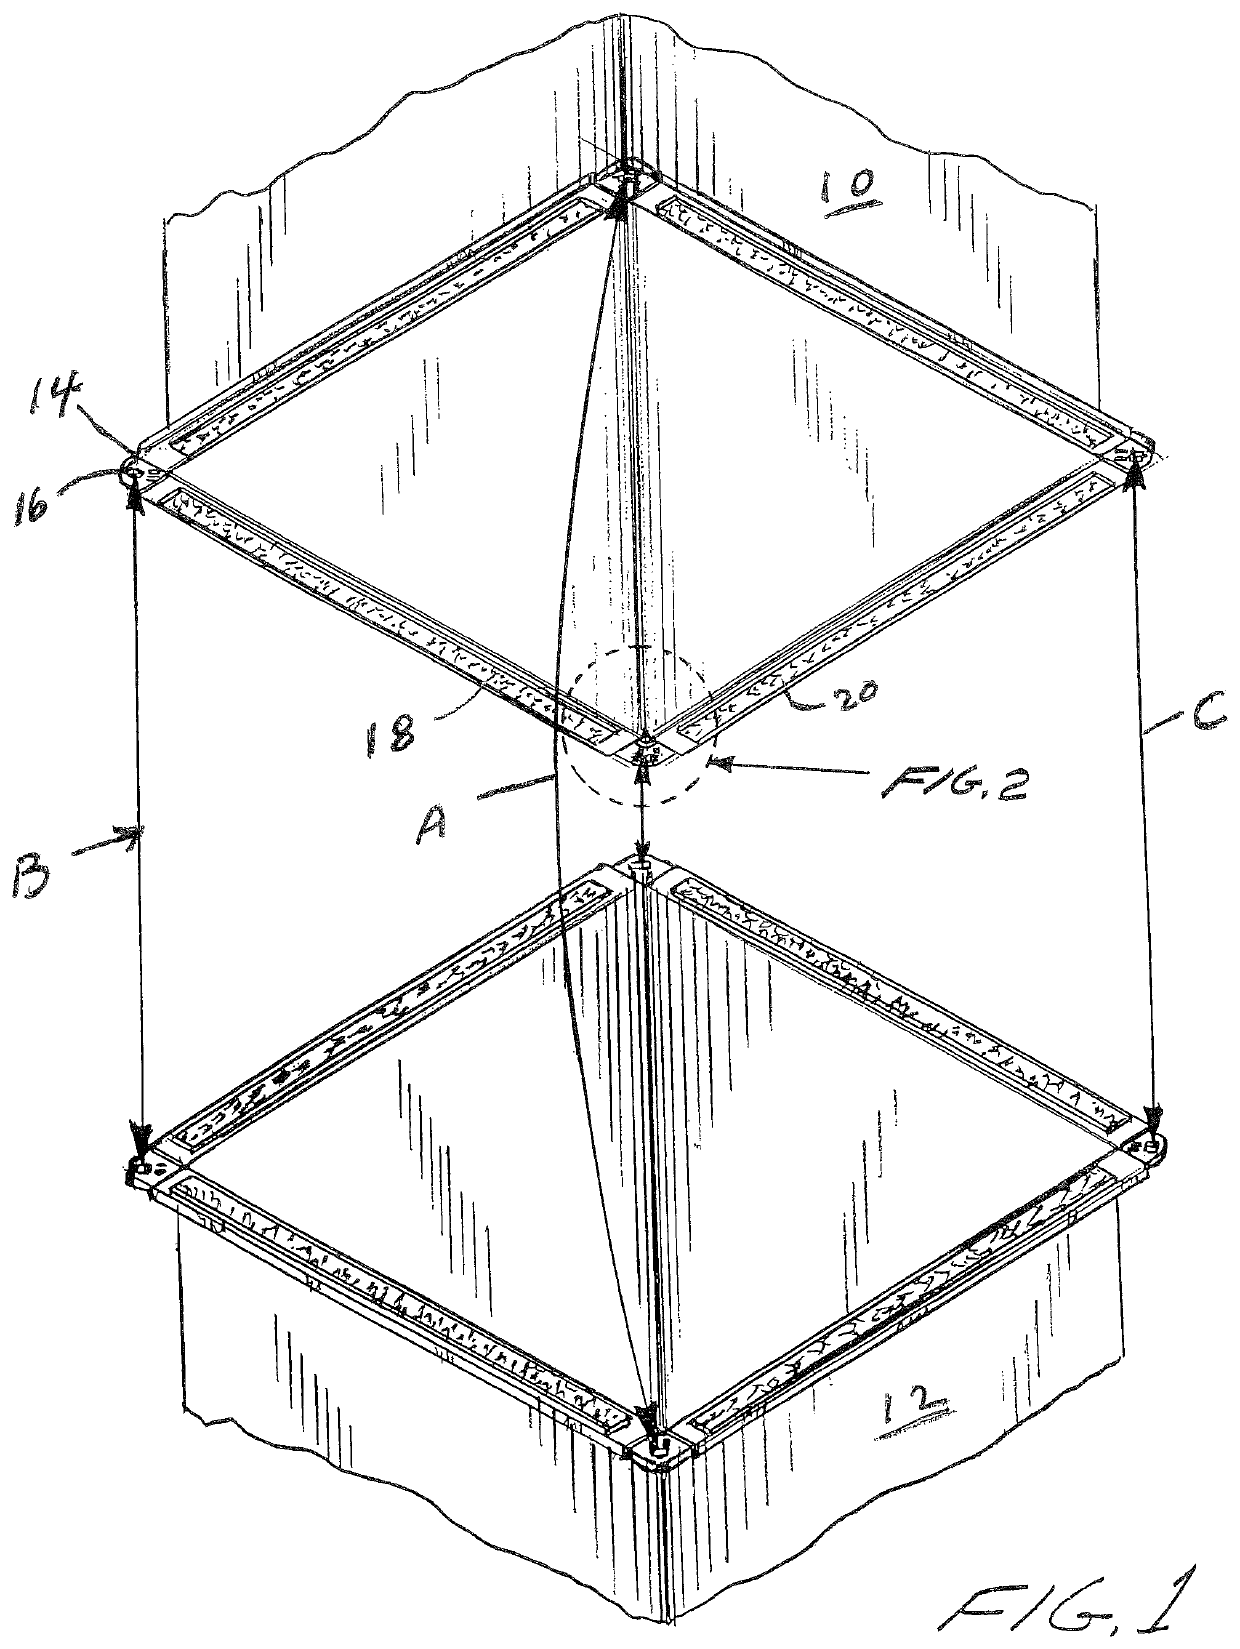 Corner seal device for ductwork for conditioned air and method of assembly of such ductwork to prevent air leaks